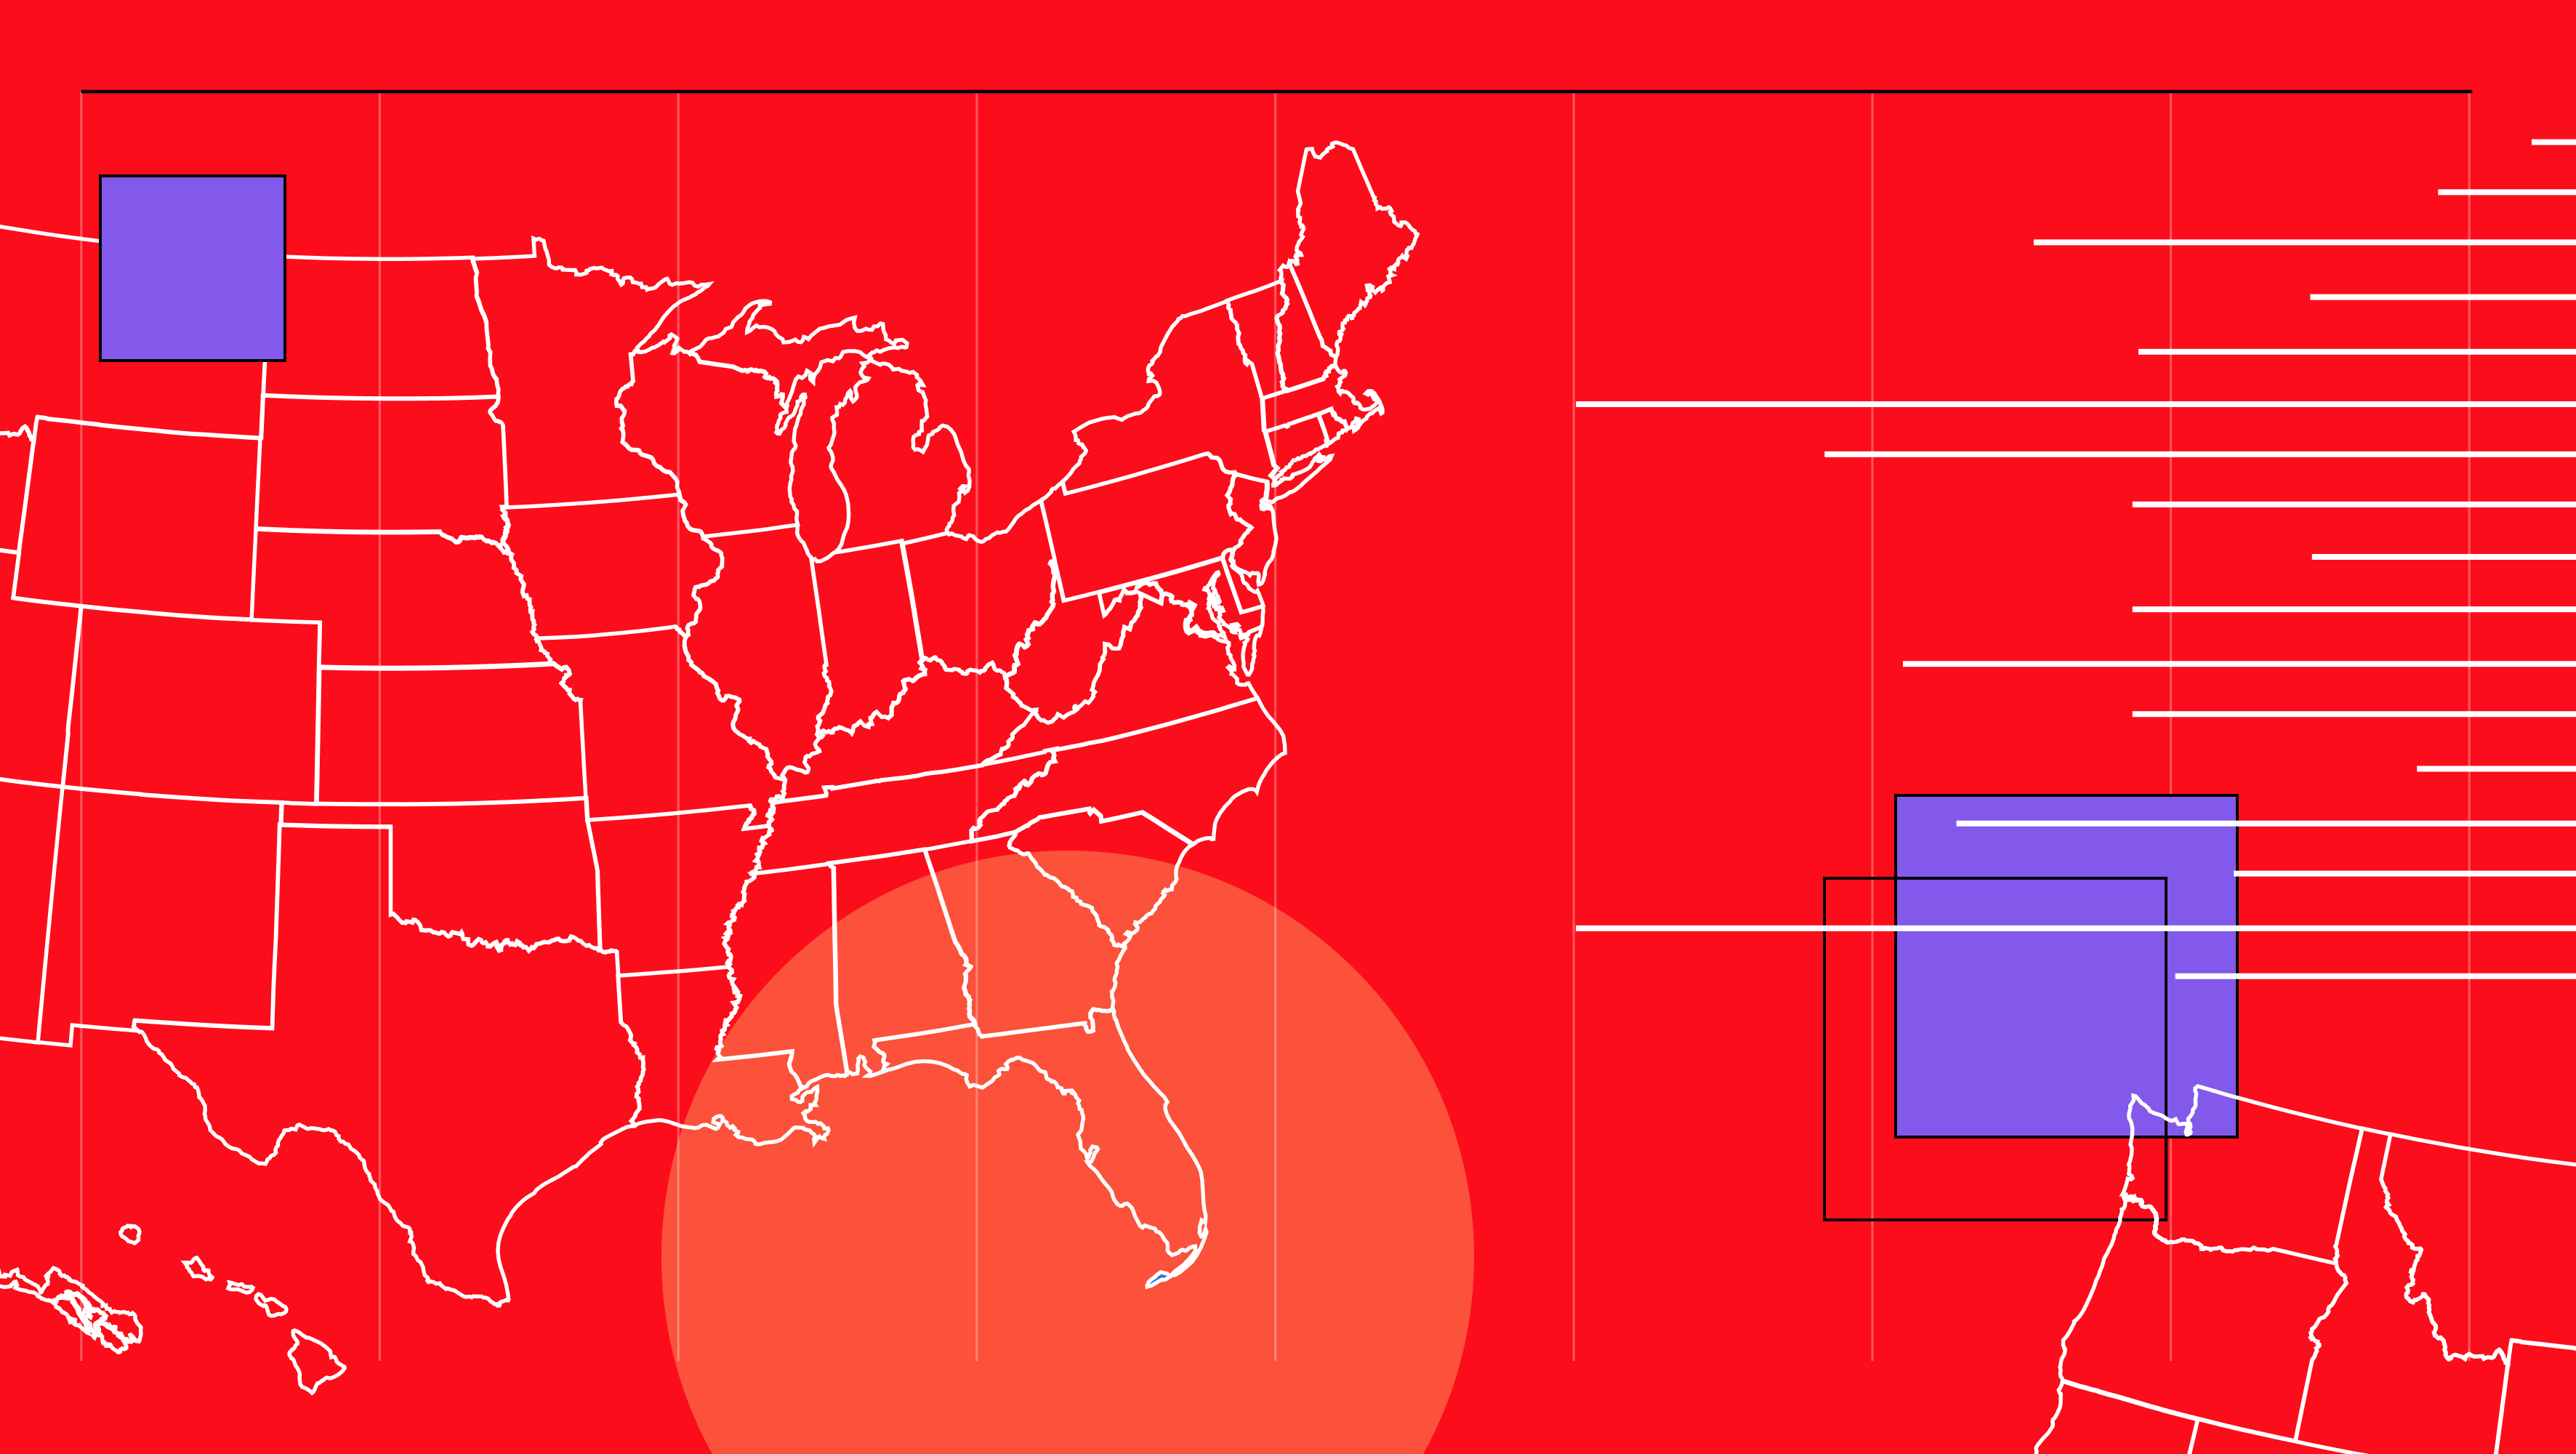 Image depicting US map against red background with abstract data visuals